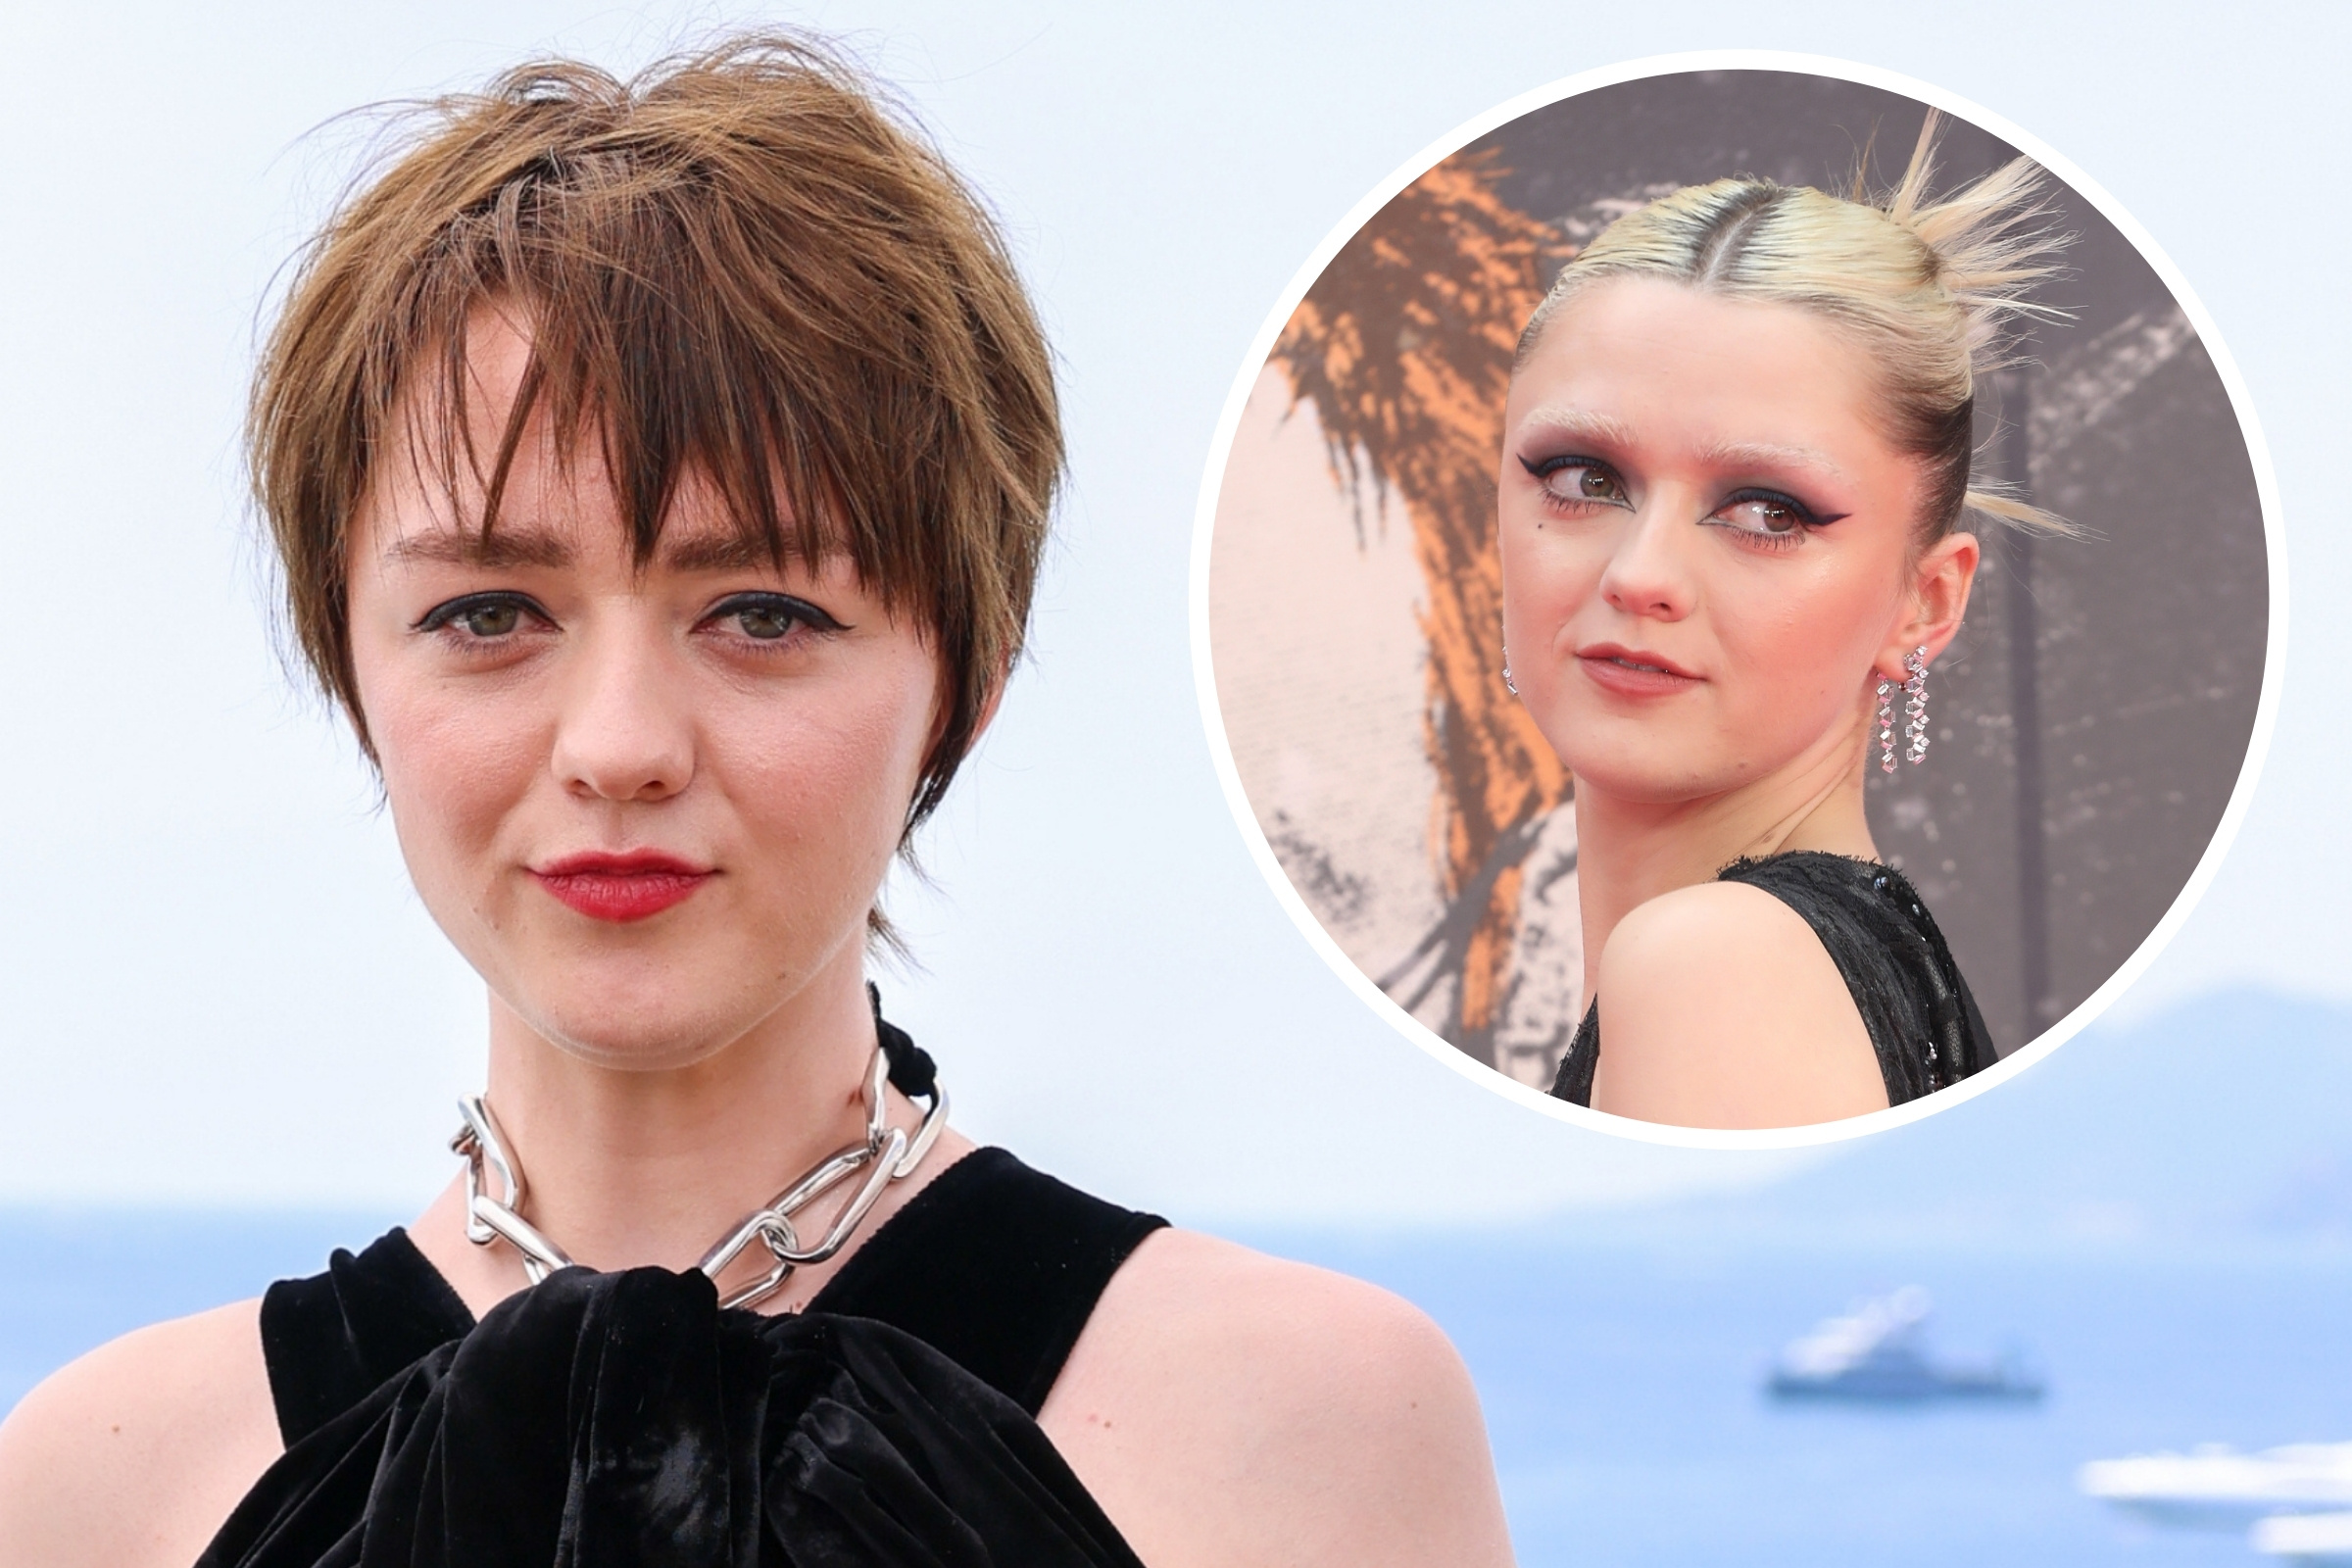 Maisie Williams goes blond to mark 'Game of Thrones' finale